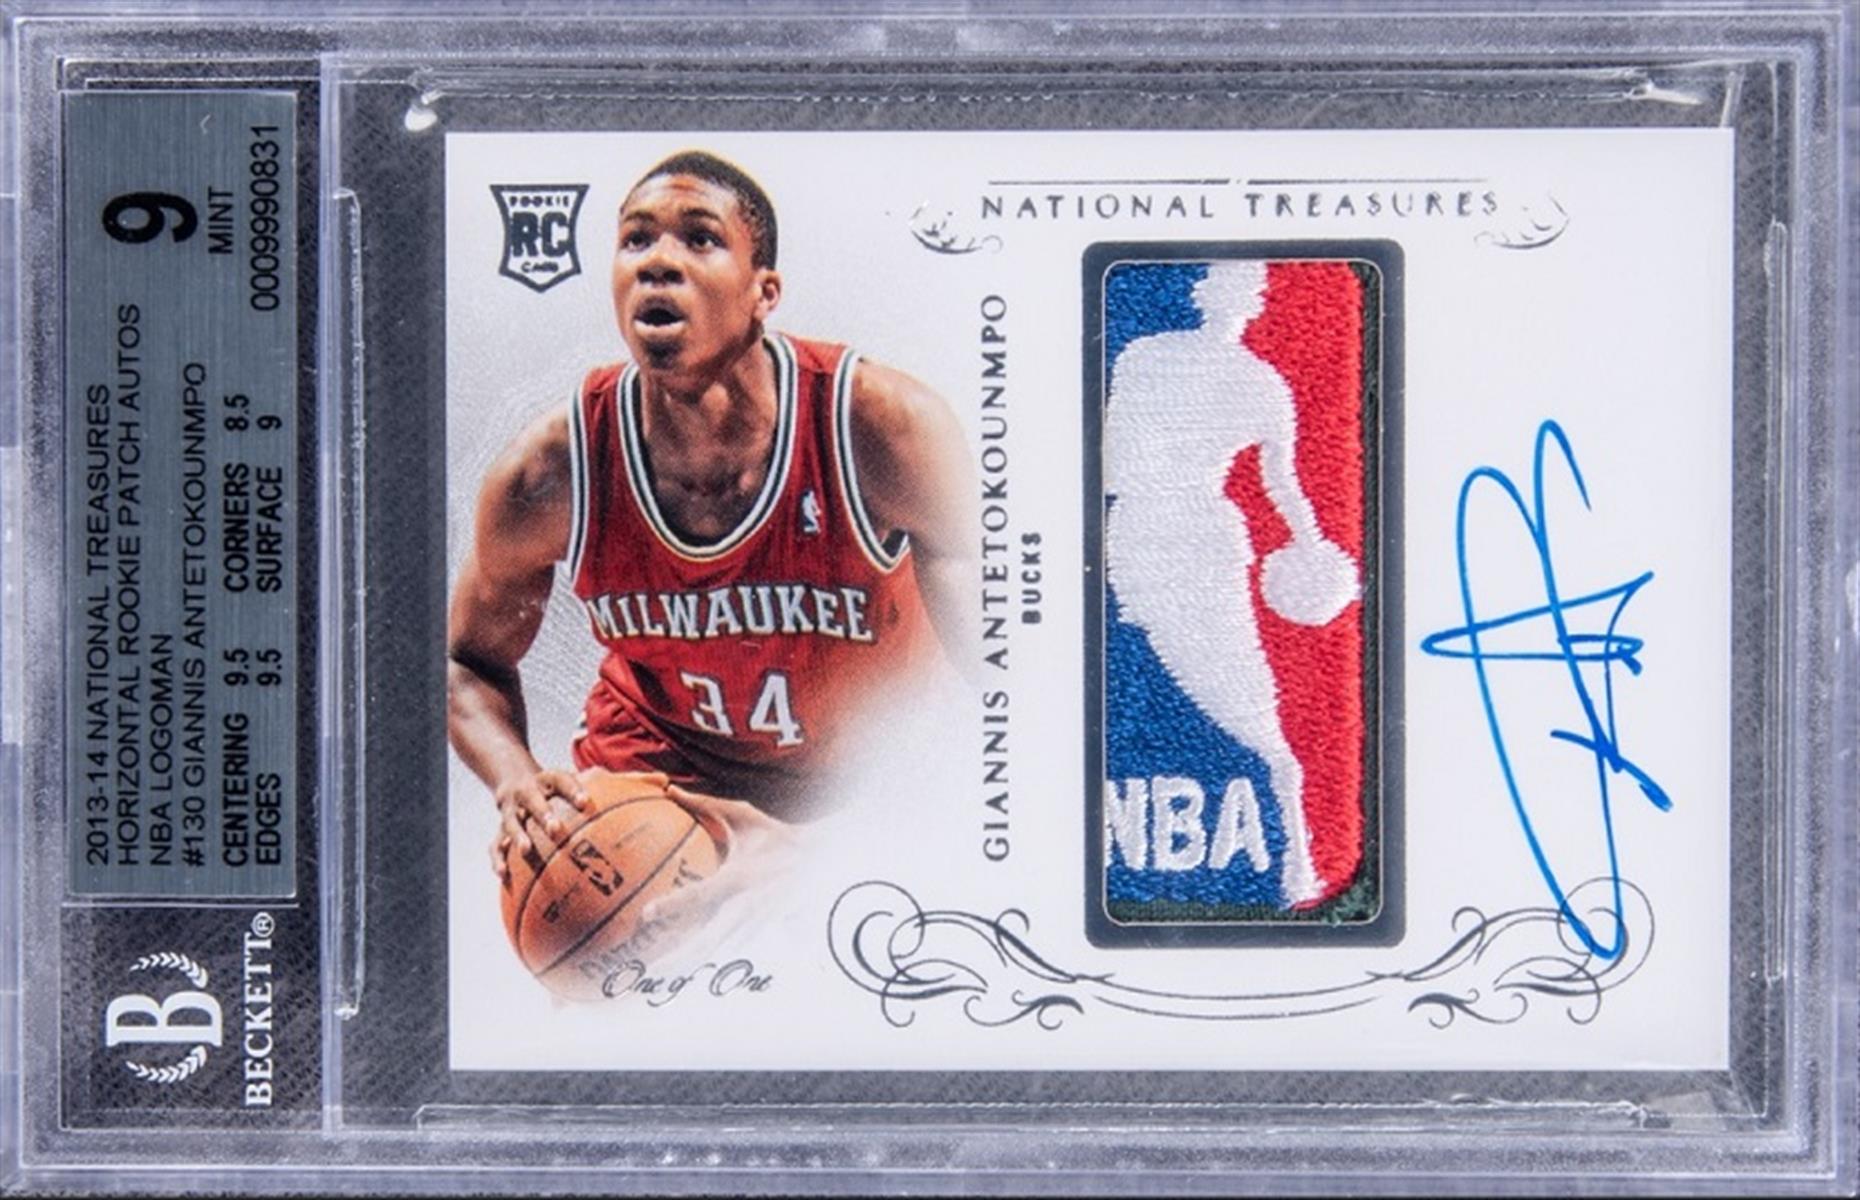 The world's most expensive sports cards